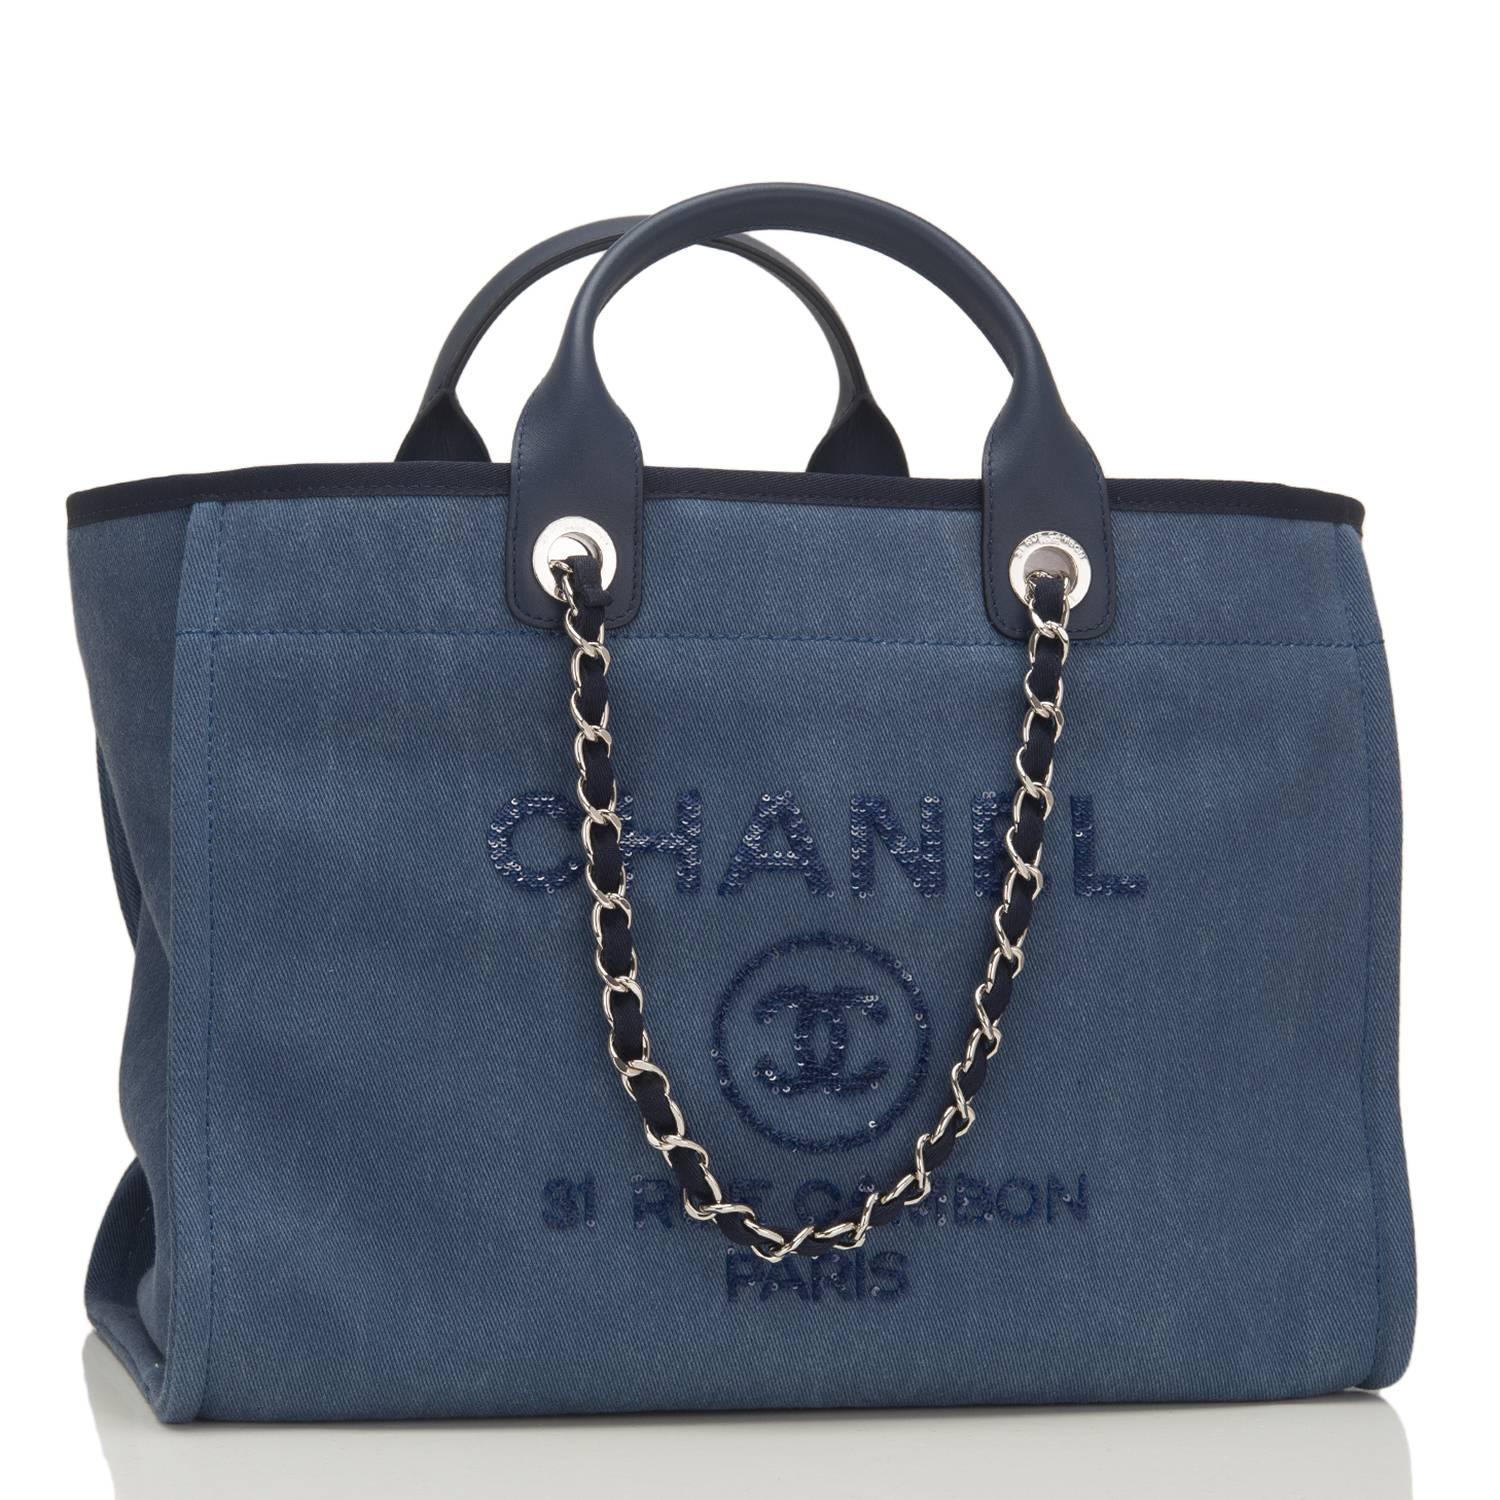 Chanel Large Deauville Canvas Tote of navy canvas with navy sequin accents and silver tone hardware.

This bag features the signature CC logo in a circle with the brand CHANEL above it and the Paris flagship store address -- 